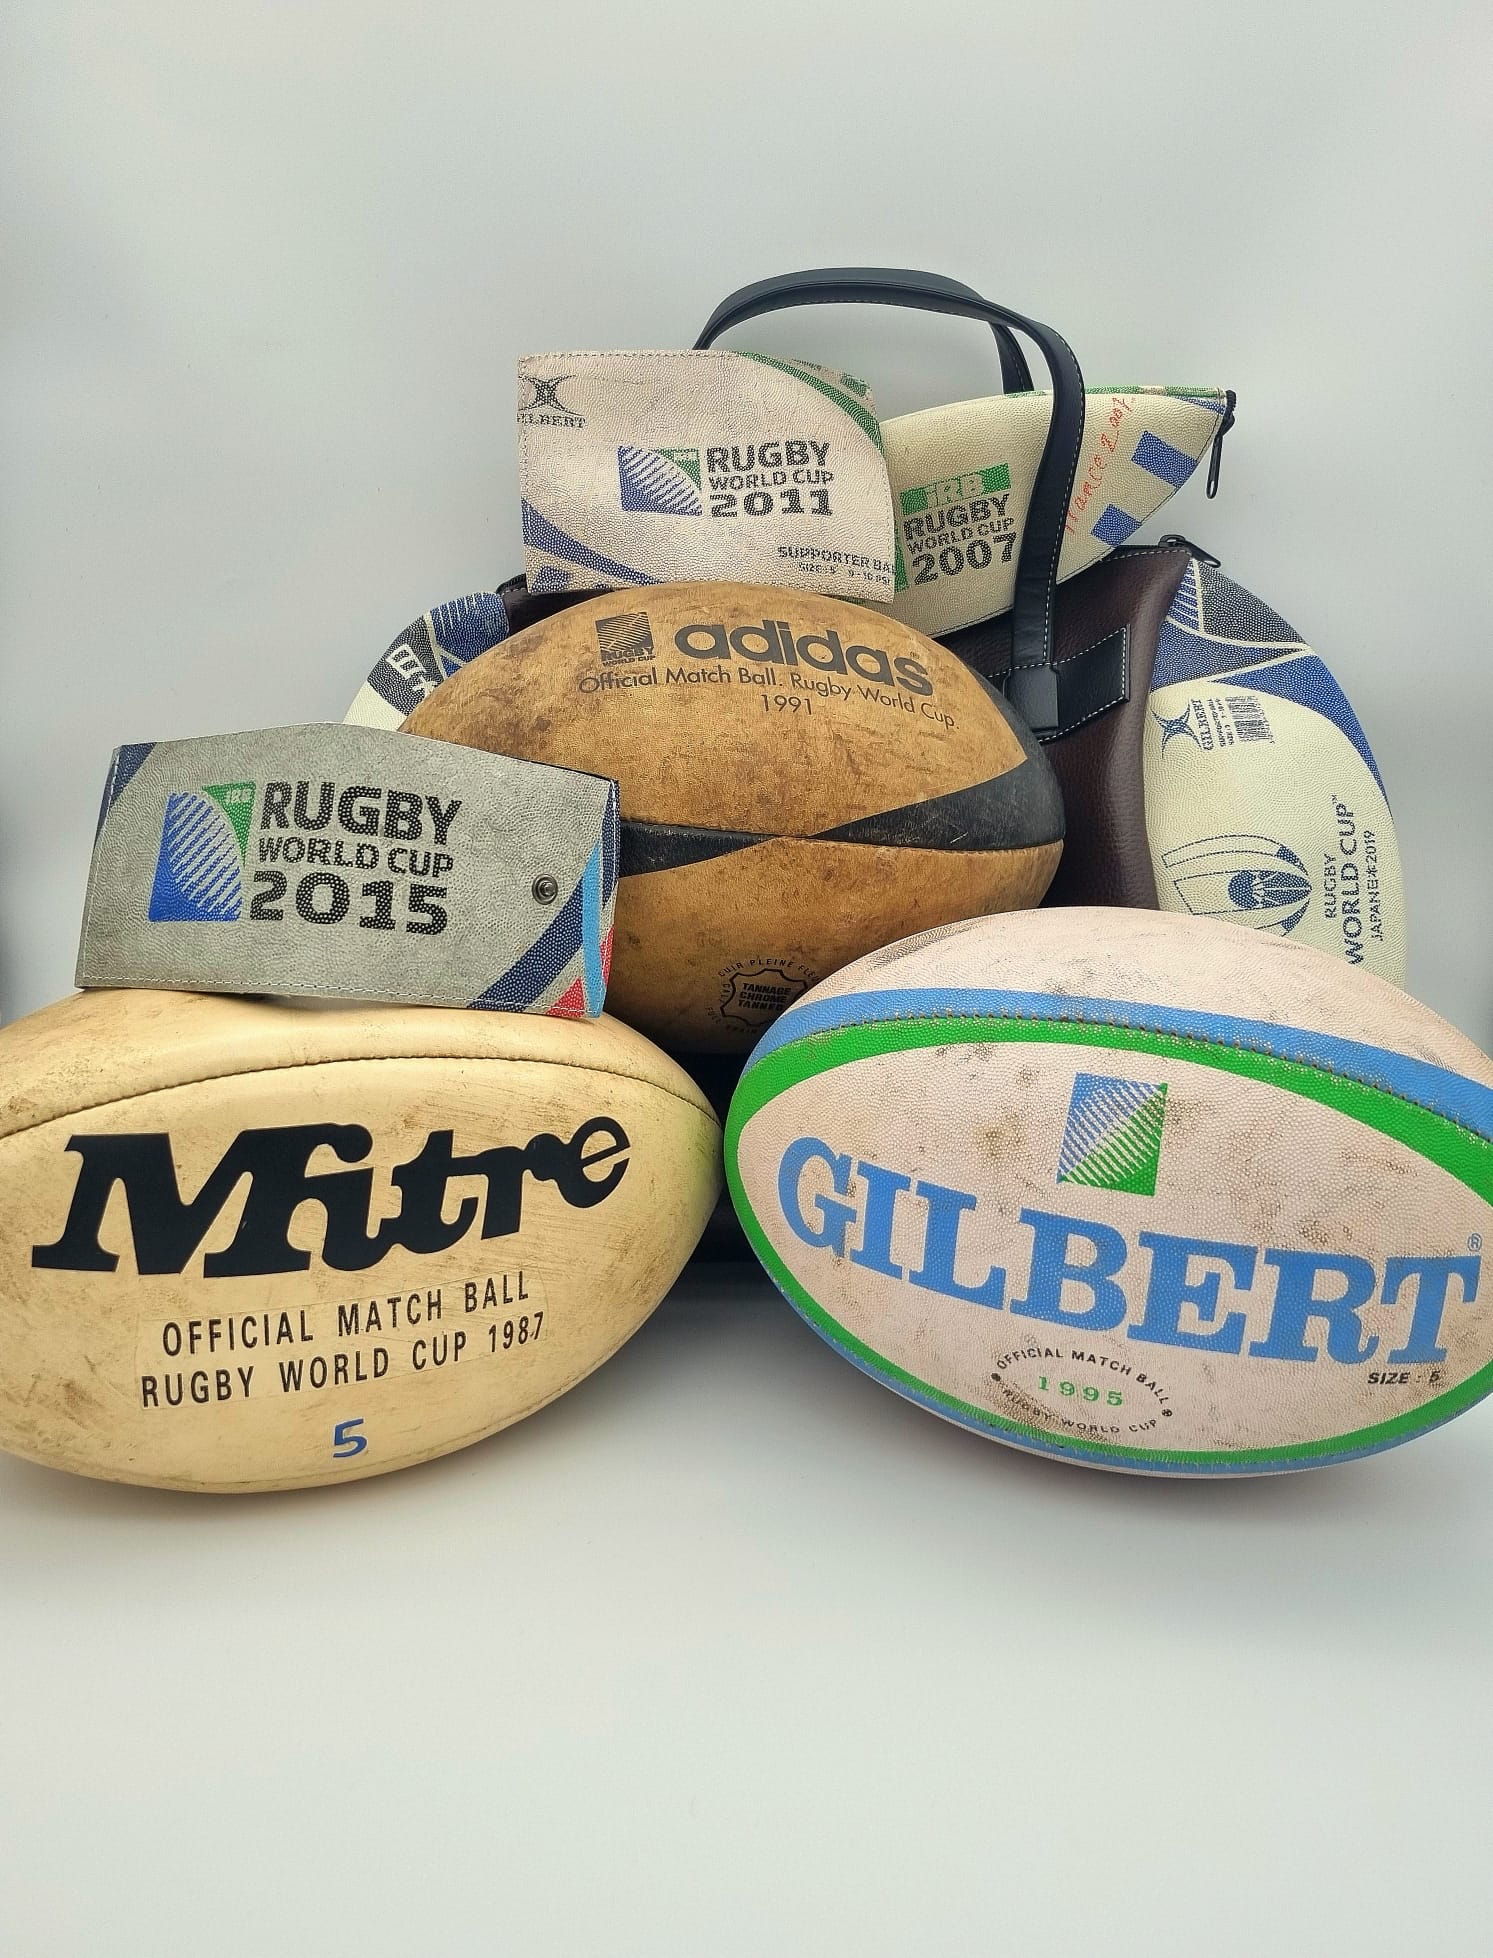 Ballons Coupe du Monde de Rugby - Match Rugby 